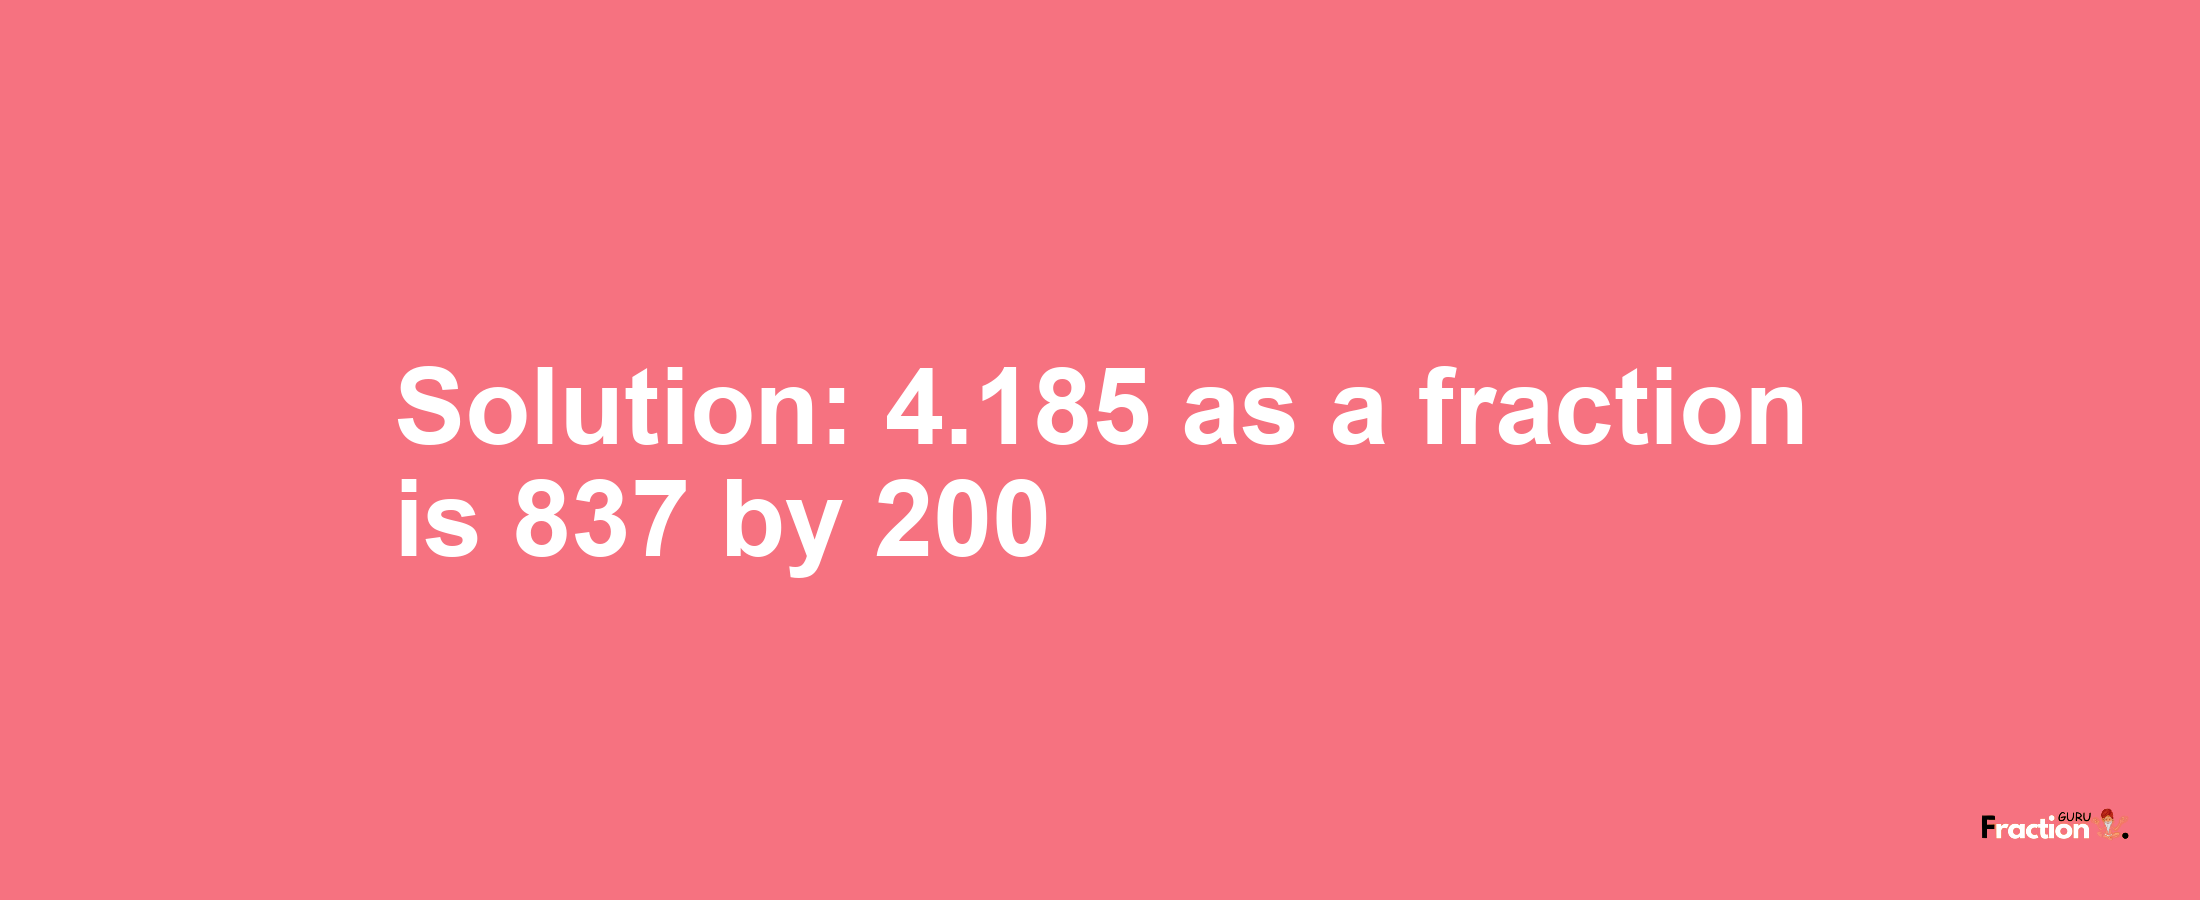 Solution:4.185 as a fraction is 837/200